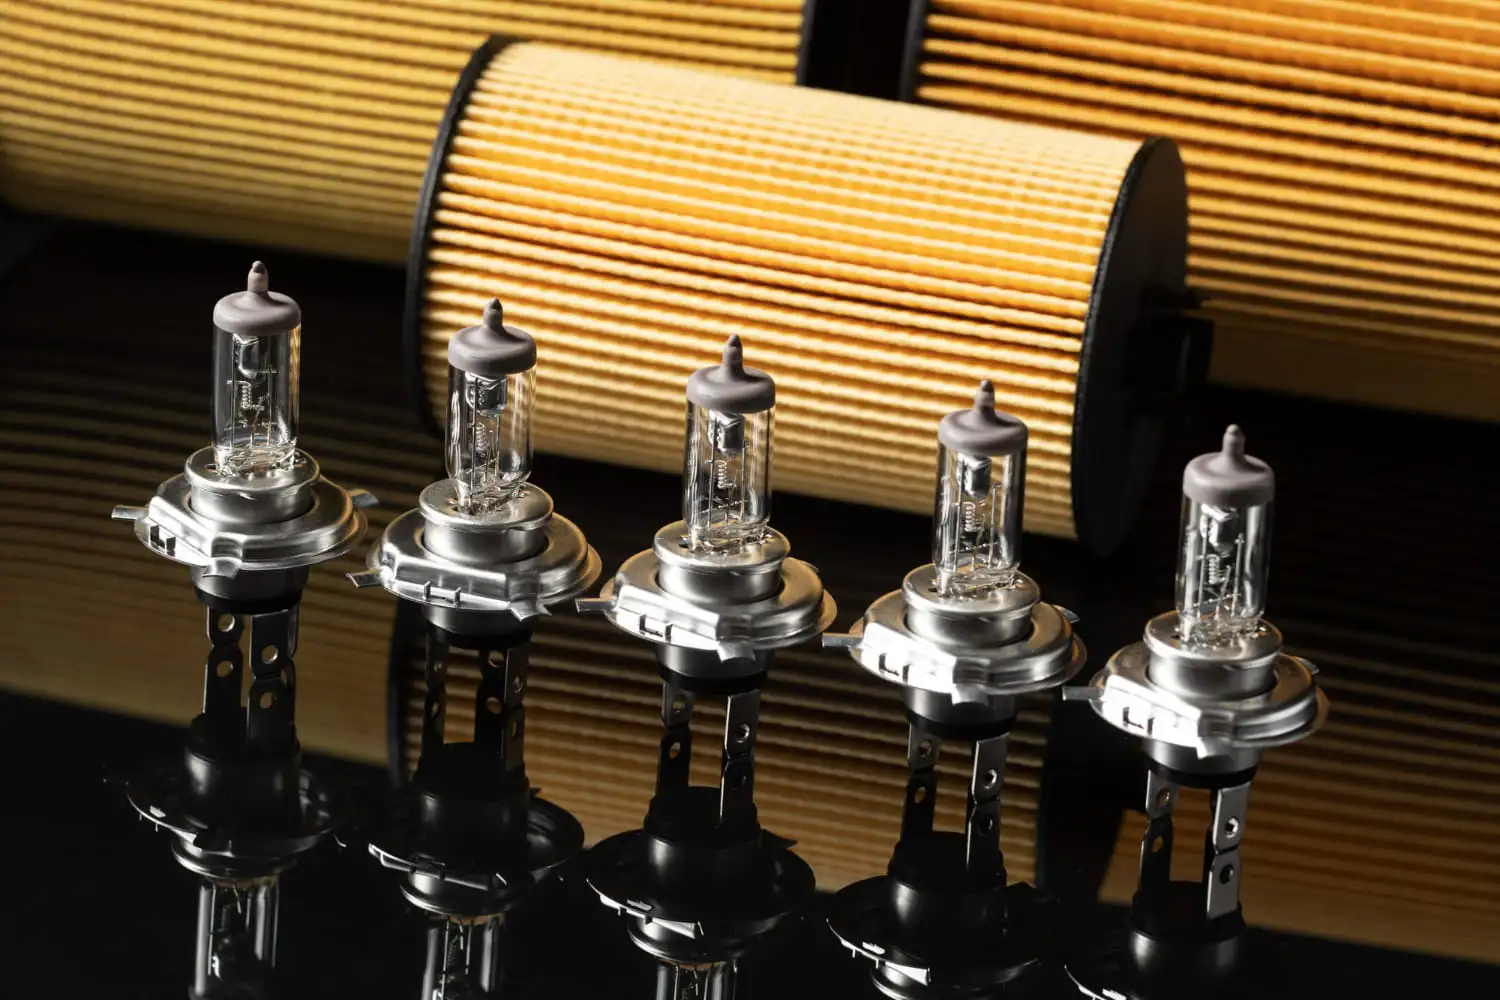 How many types of filters are used in hydraulics oil filters? 